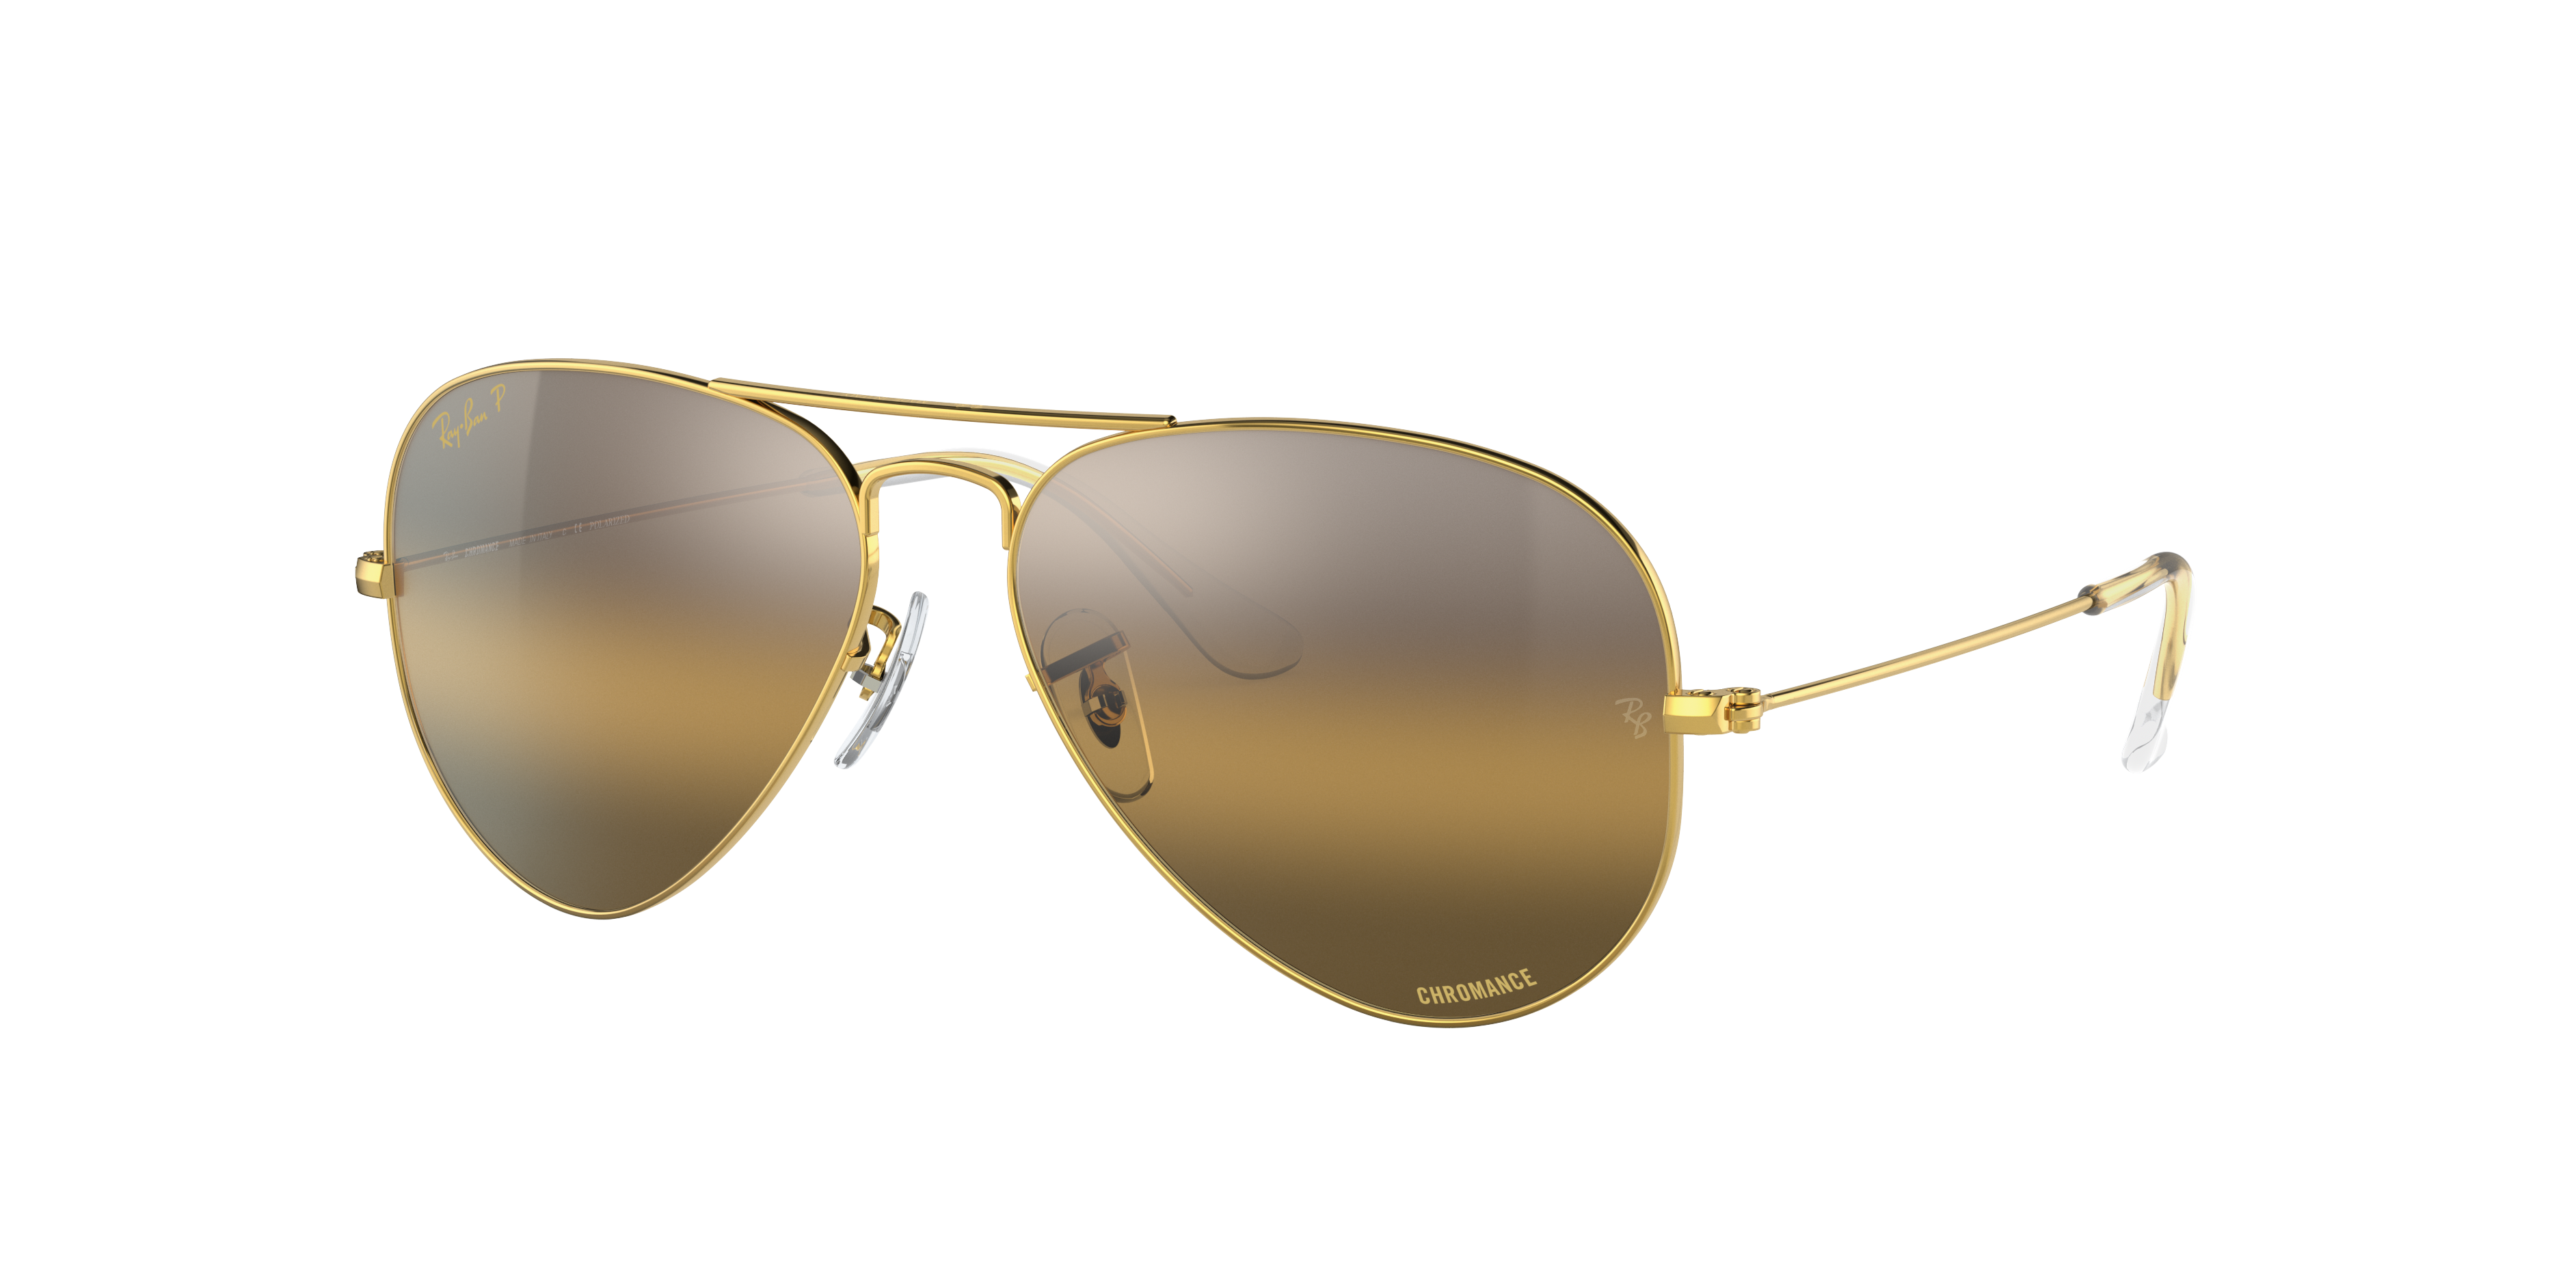 Aviator Chromance Sunglasses in Gold and Silver Brown Chromance 